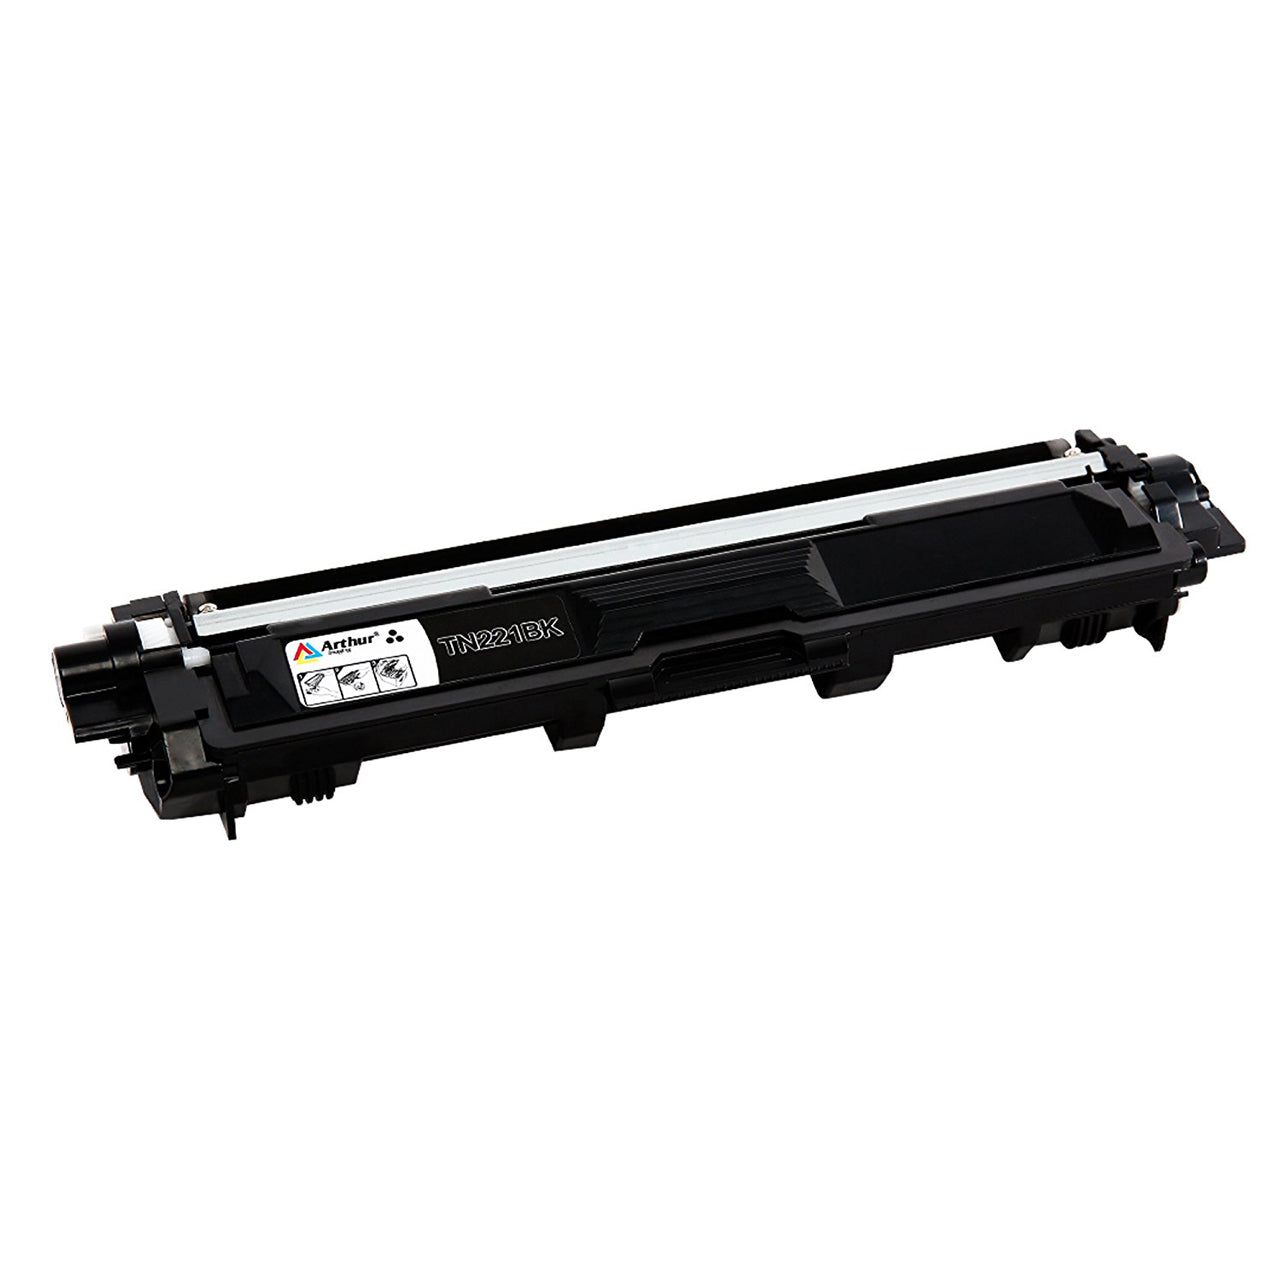  HALLOLUX TN-241 TN-245 Toner Cartridges Replacement for Brother  TN241 TN245 Compatible with 9015CDW 9020CDW 9022CDW 3140CW 3142CW 3150CDN  3150CDW 3170CDW (Black Cyan Magenta Yellow, 4Pack) : Office Products